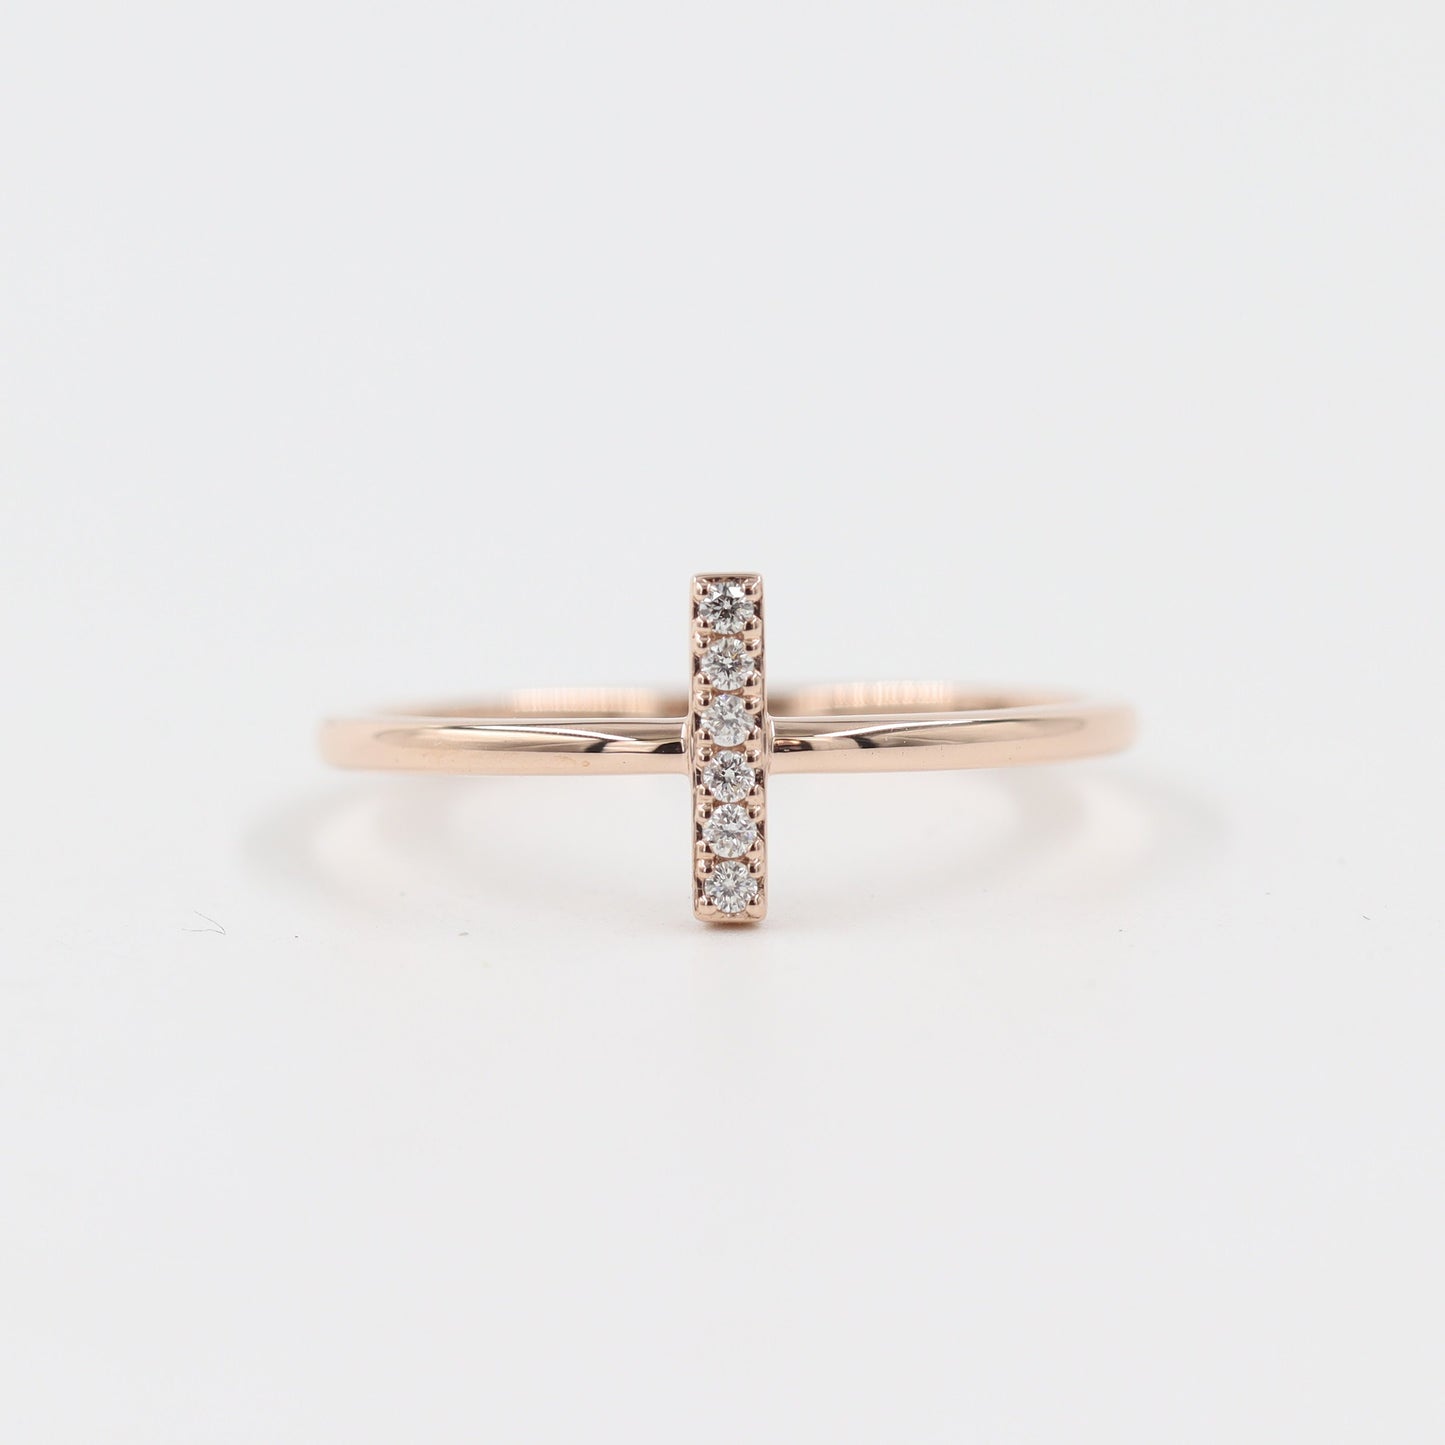 Diamond Bar Ring/ Dainty Diamond Ring/ Natural Diamond Band /Simple Gold Ring / Unique Stackable Ring / 14k Gold Stacking Ring/ Gift for her